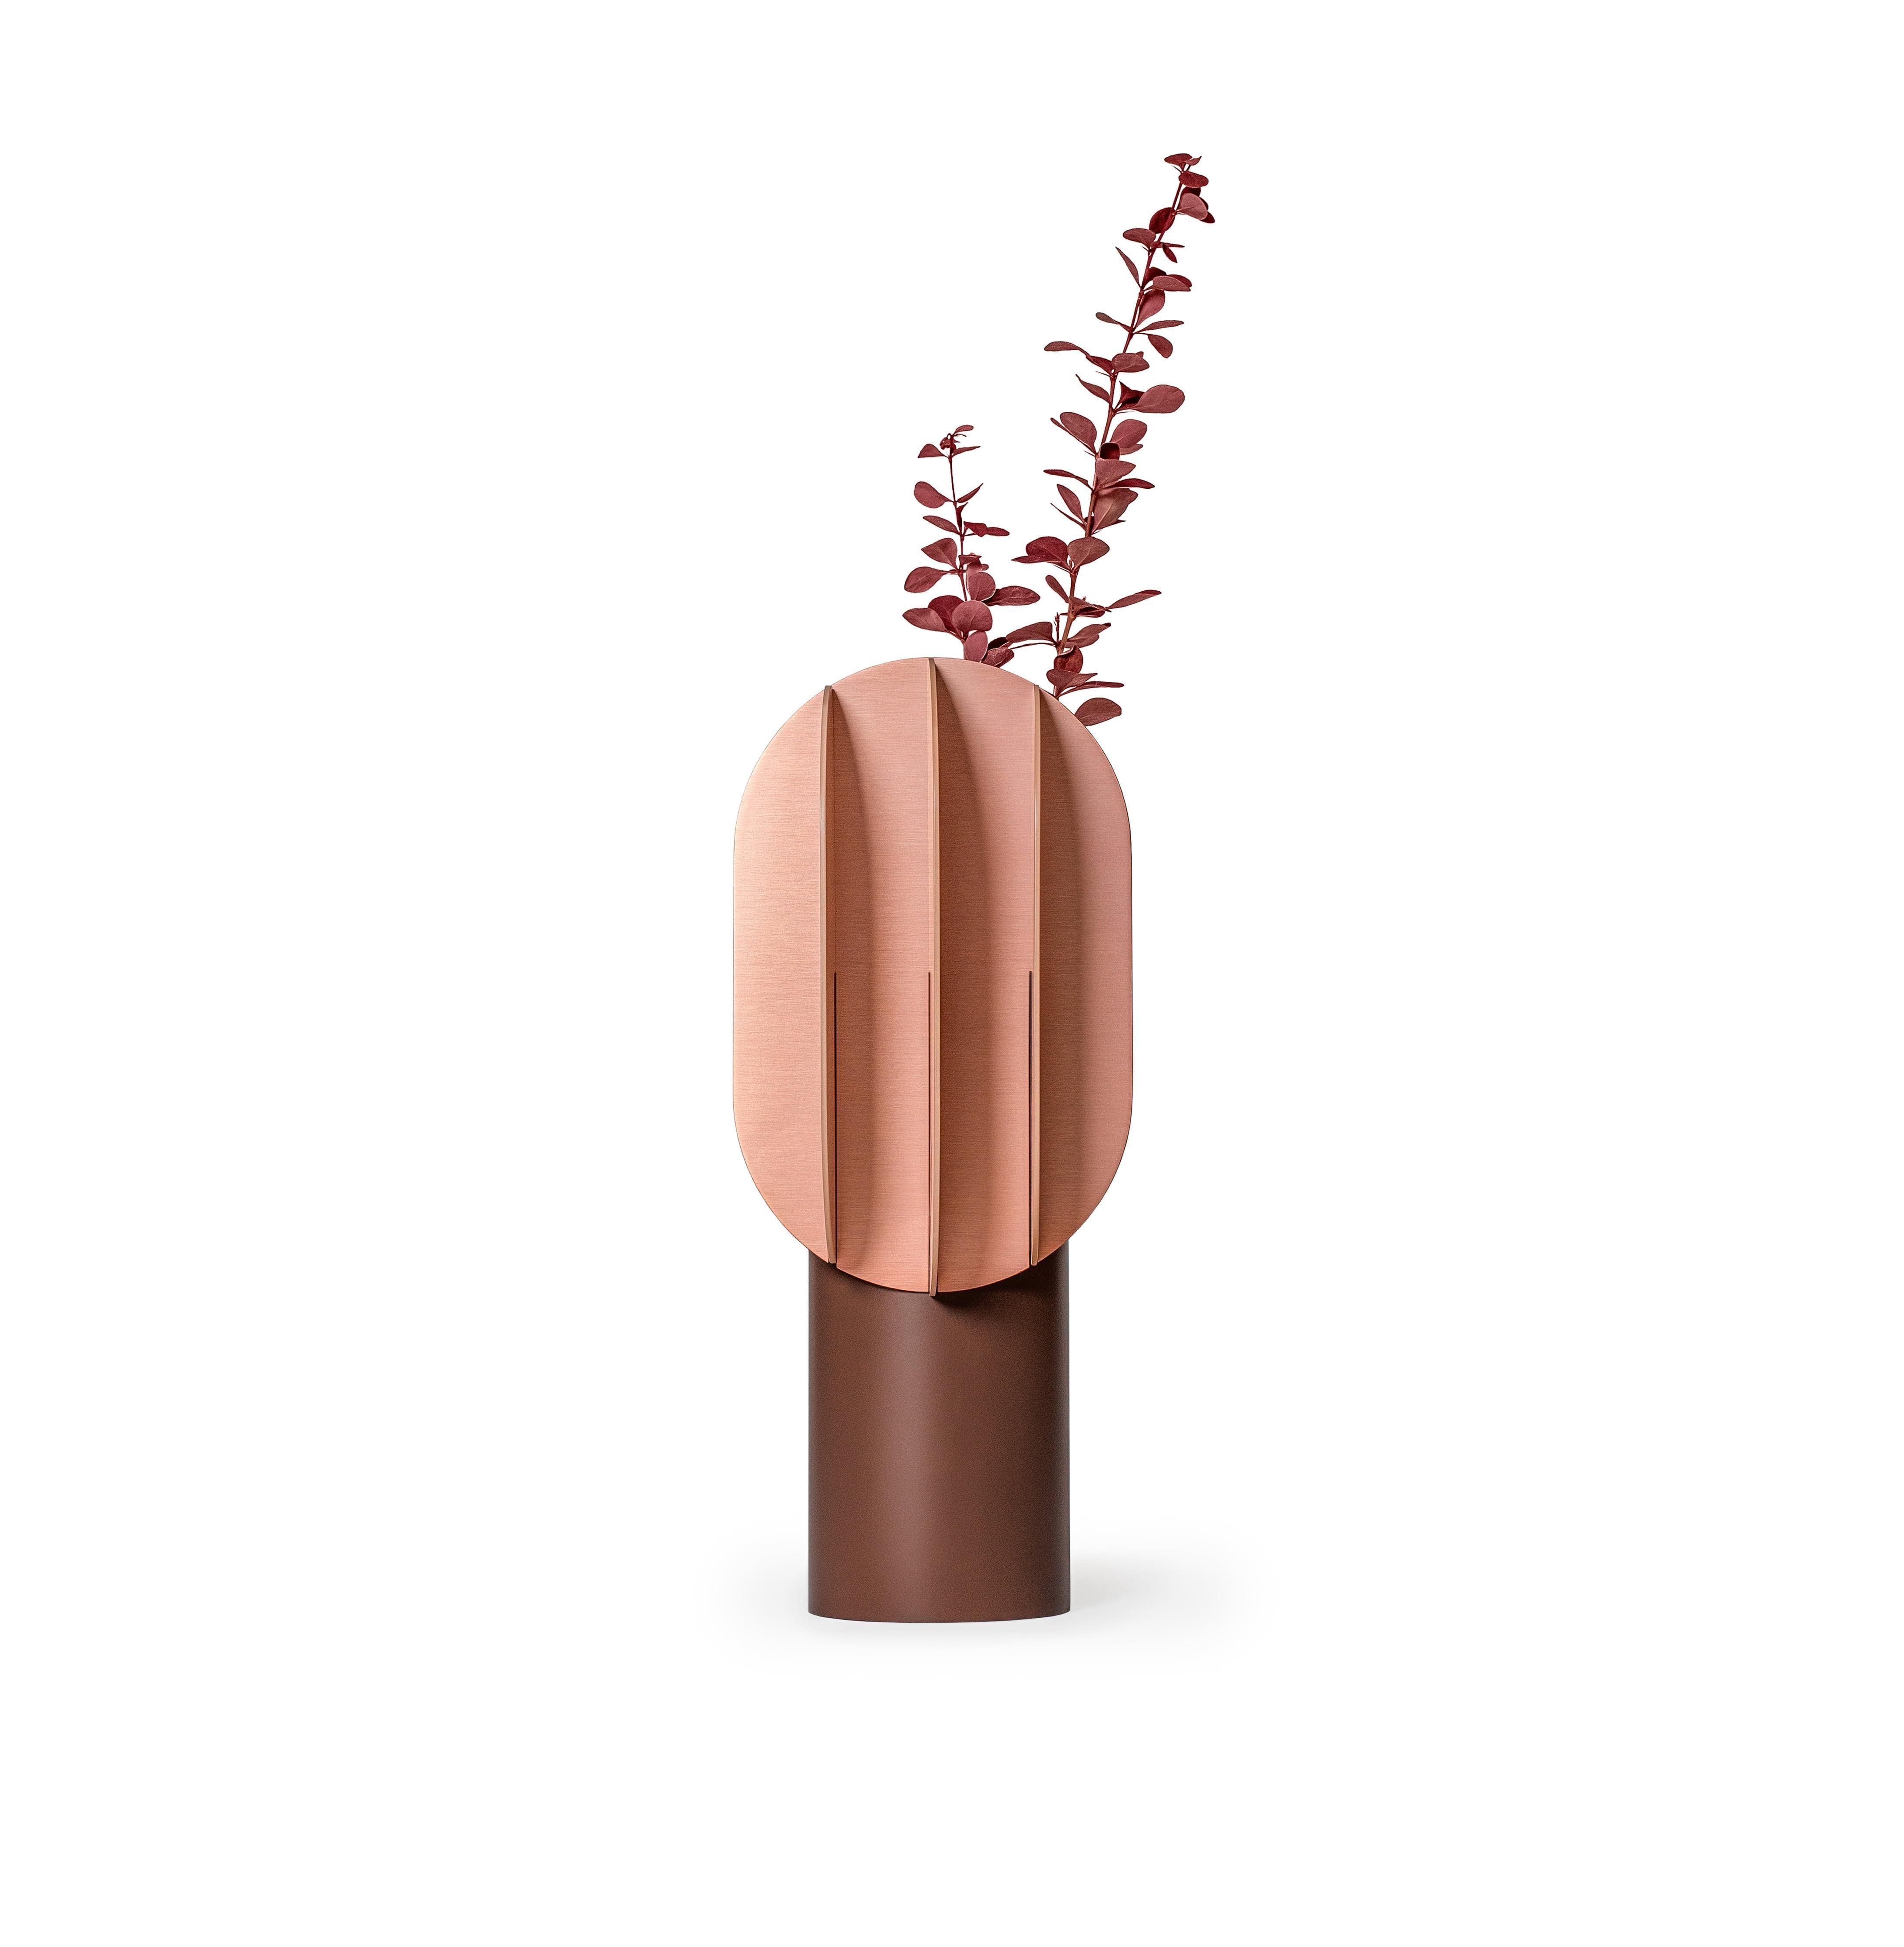 Organic Modern Contemporary Vase 'Gabo CS7' by Noom, Copper and Steel For Sale